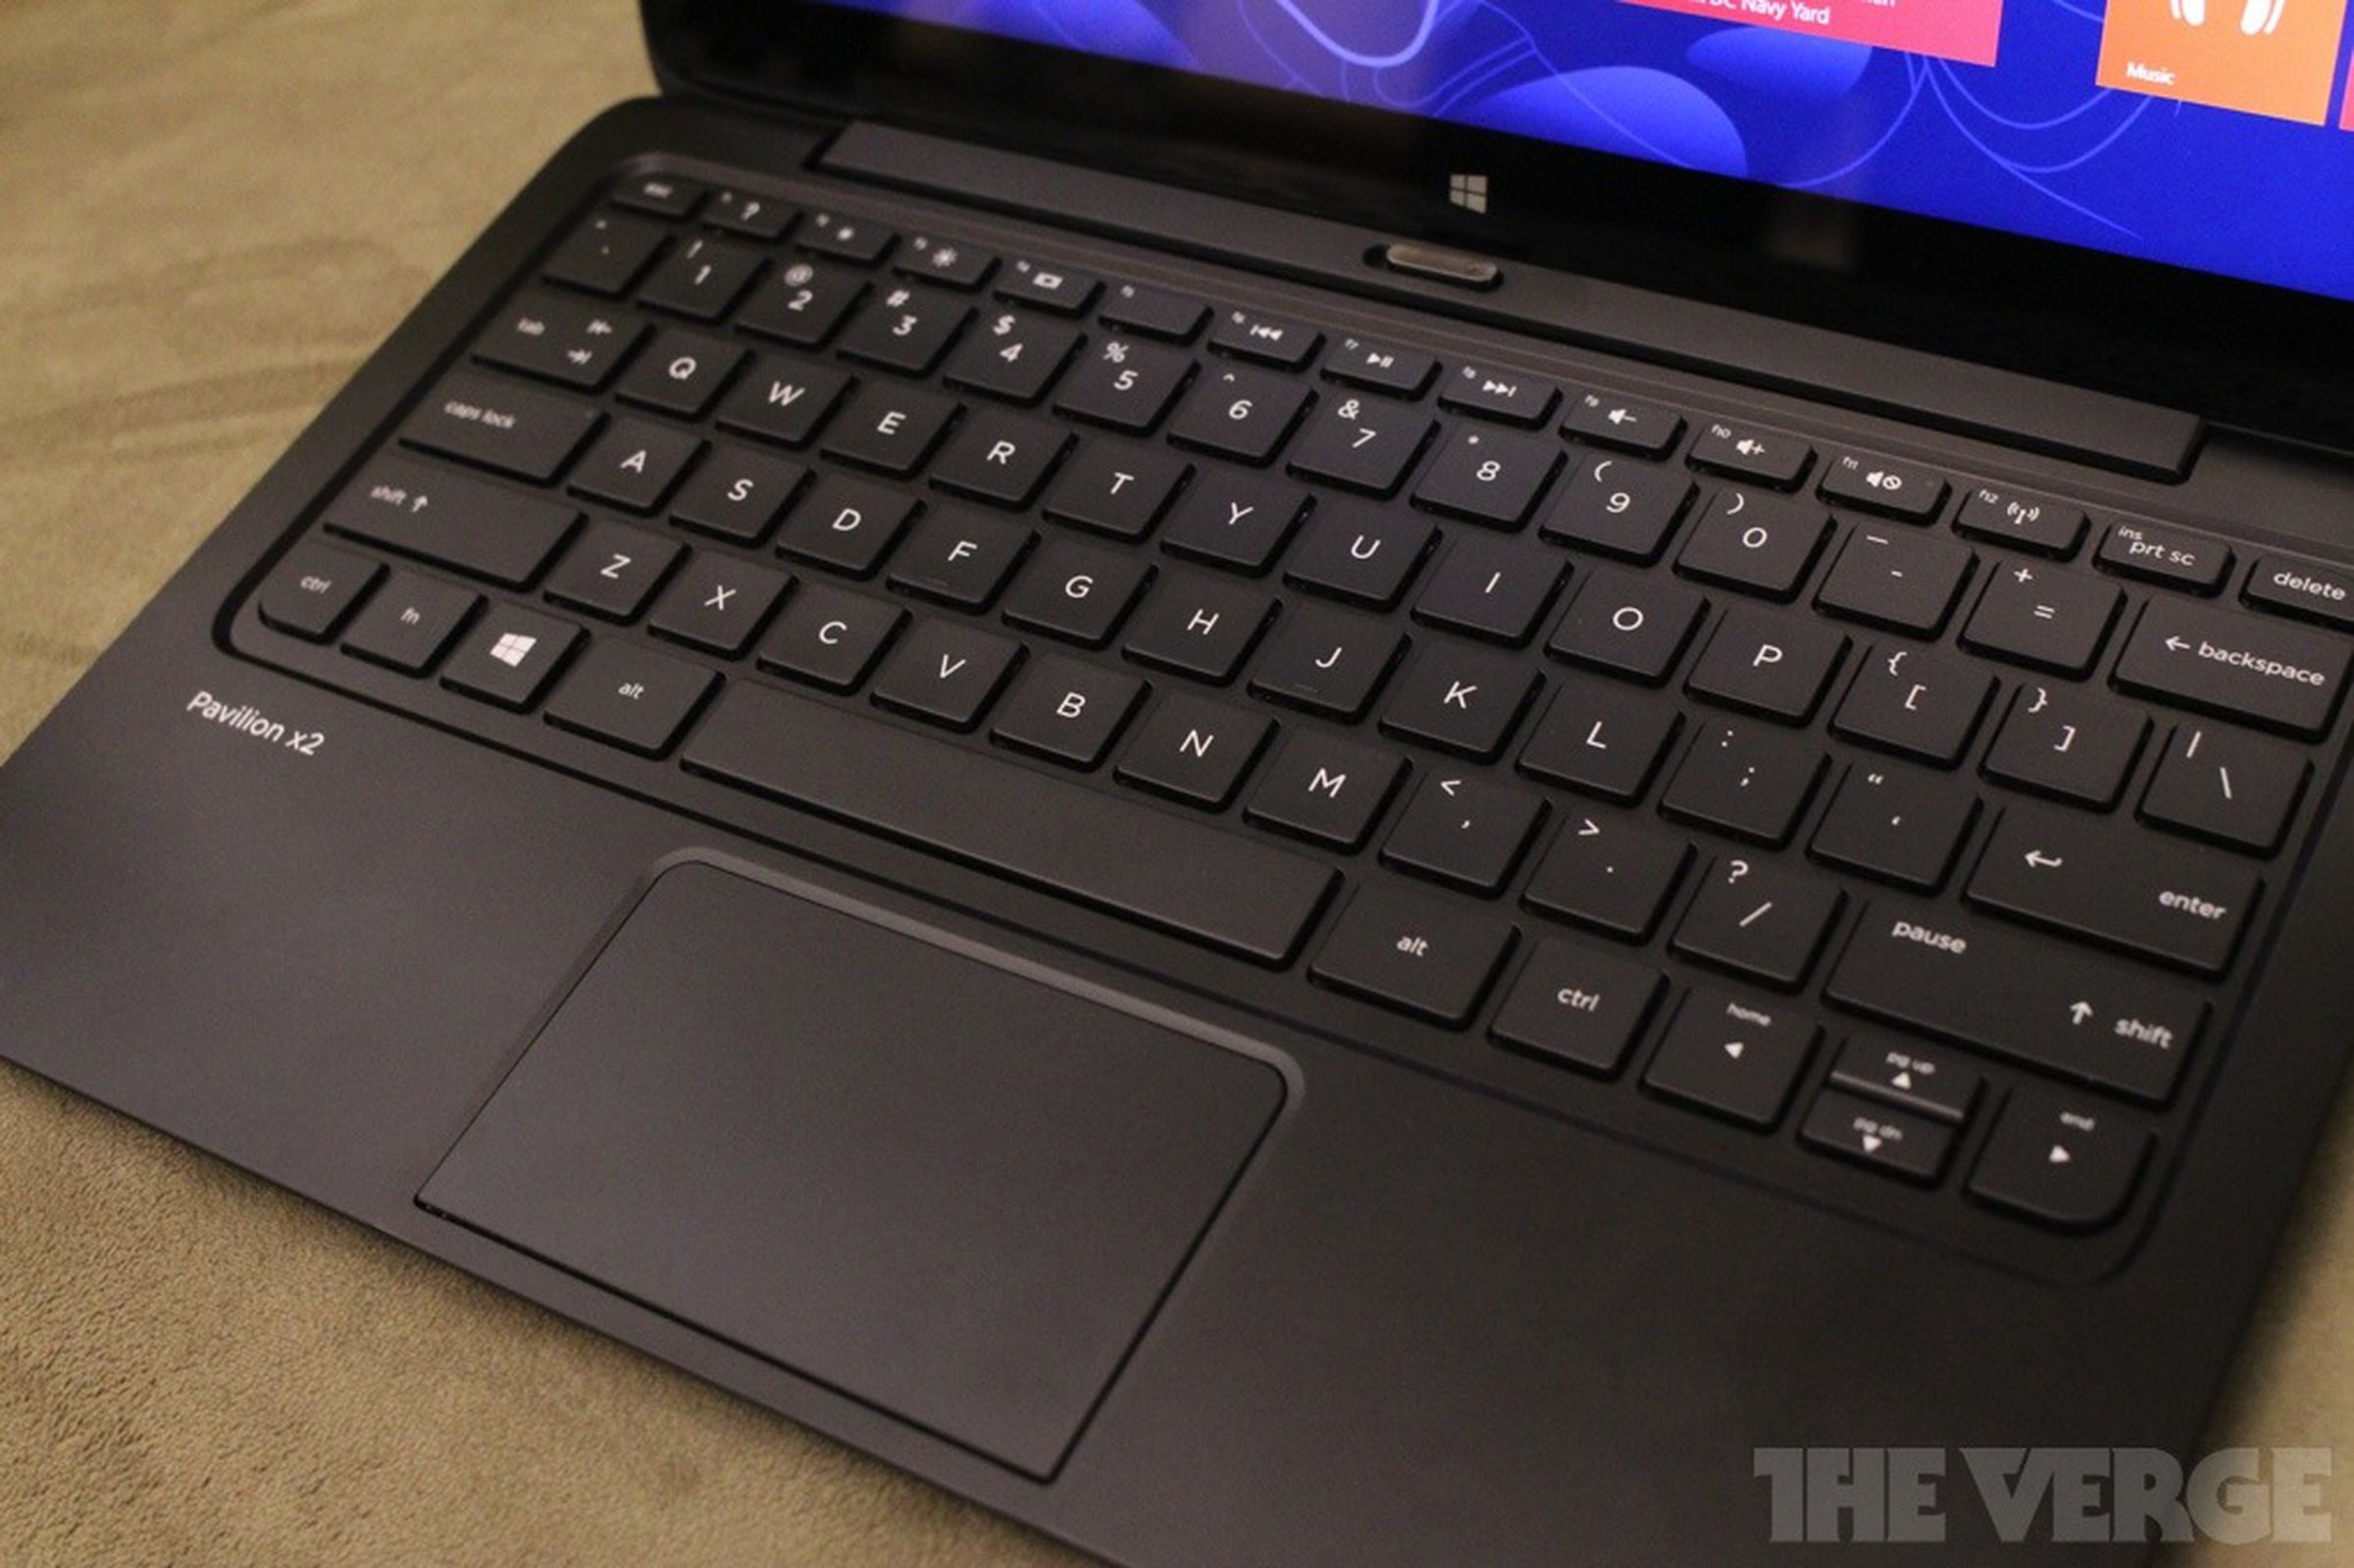 HP Spectre x2, Pavilion x2, and Spectre 13 Ultrabook hands-on pictures